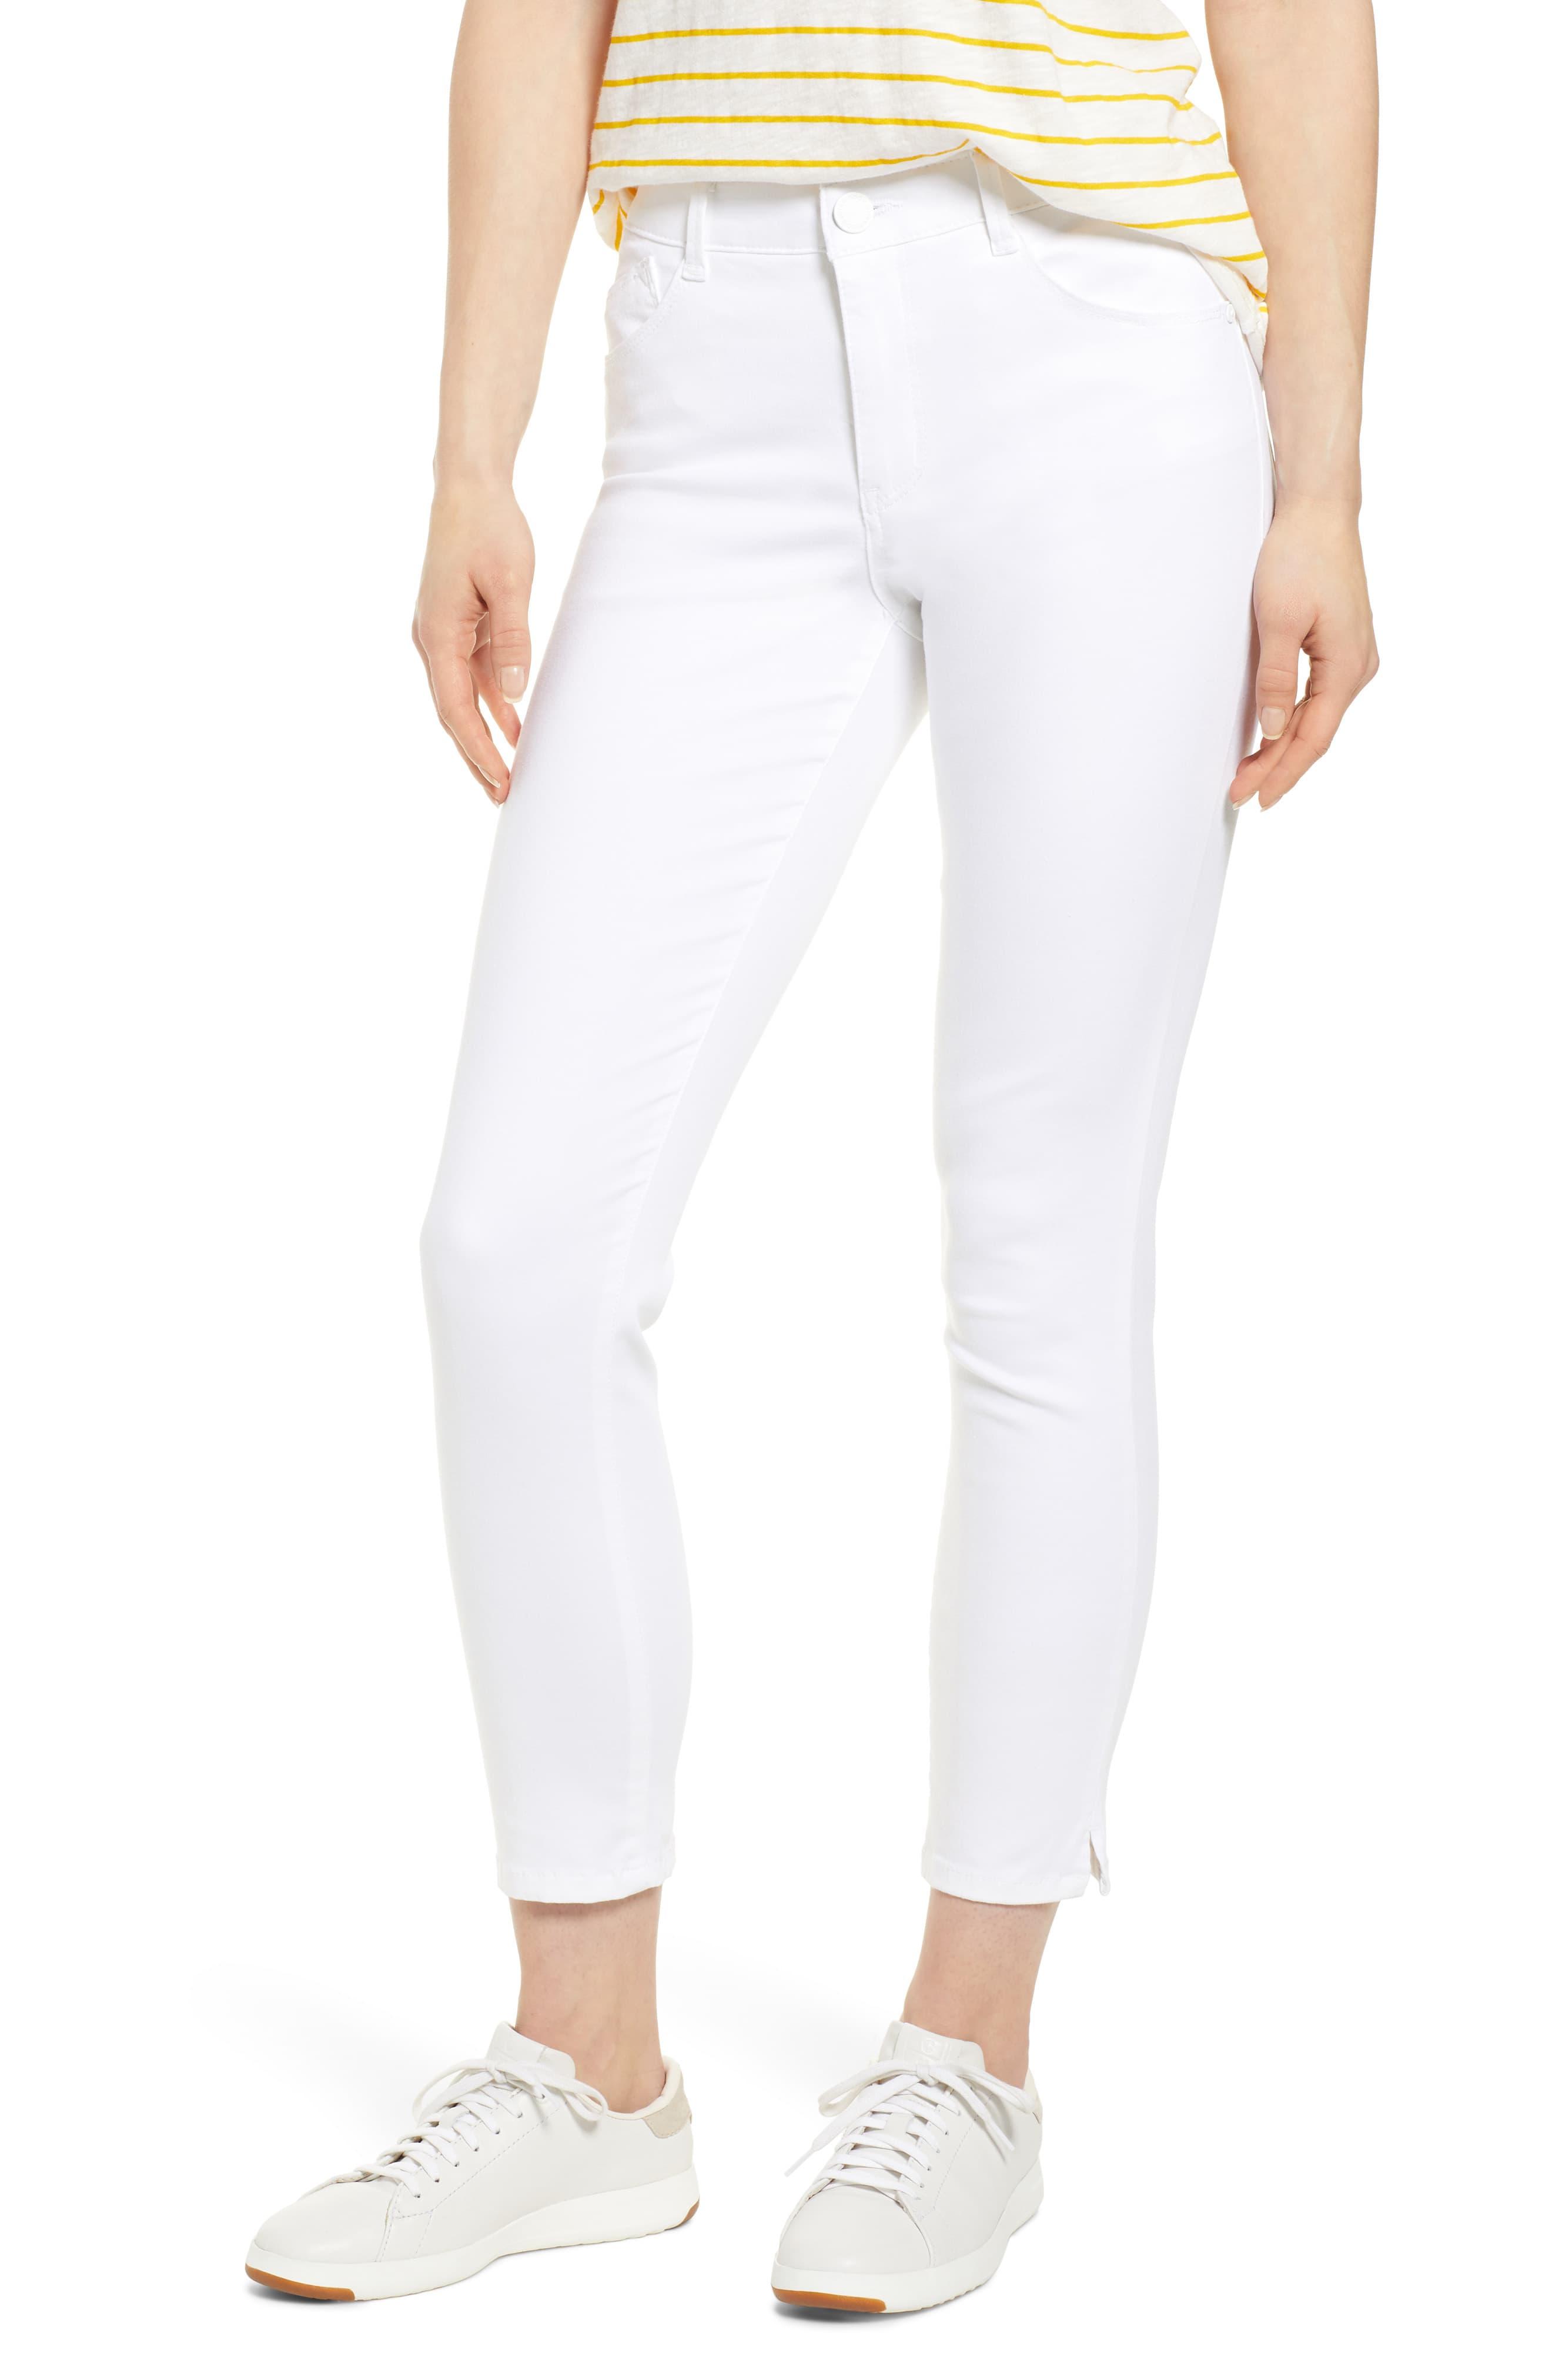 Wit & Wisdom Ab-solution High Waist Ankle Skinny Pants in White - Lyst